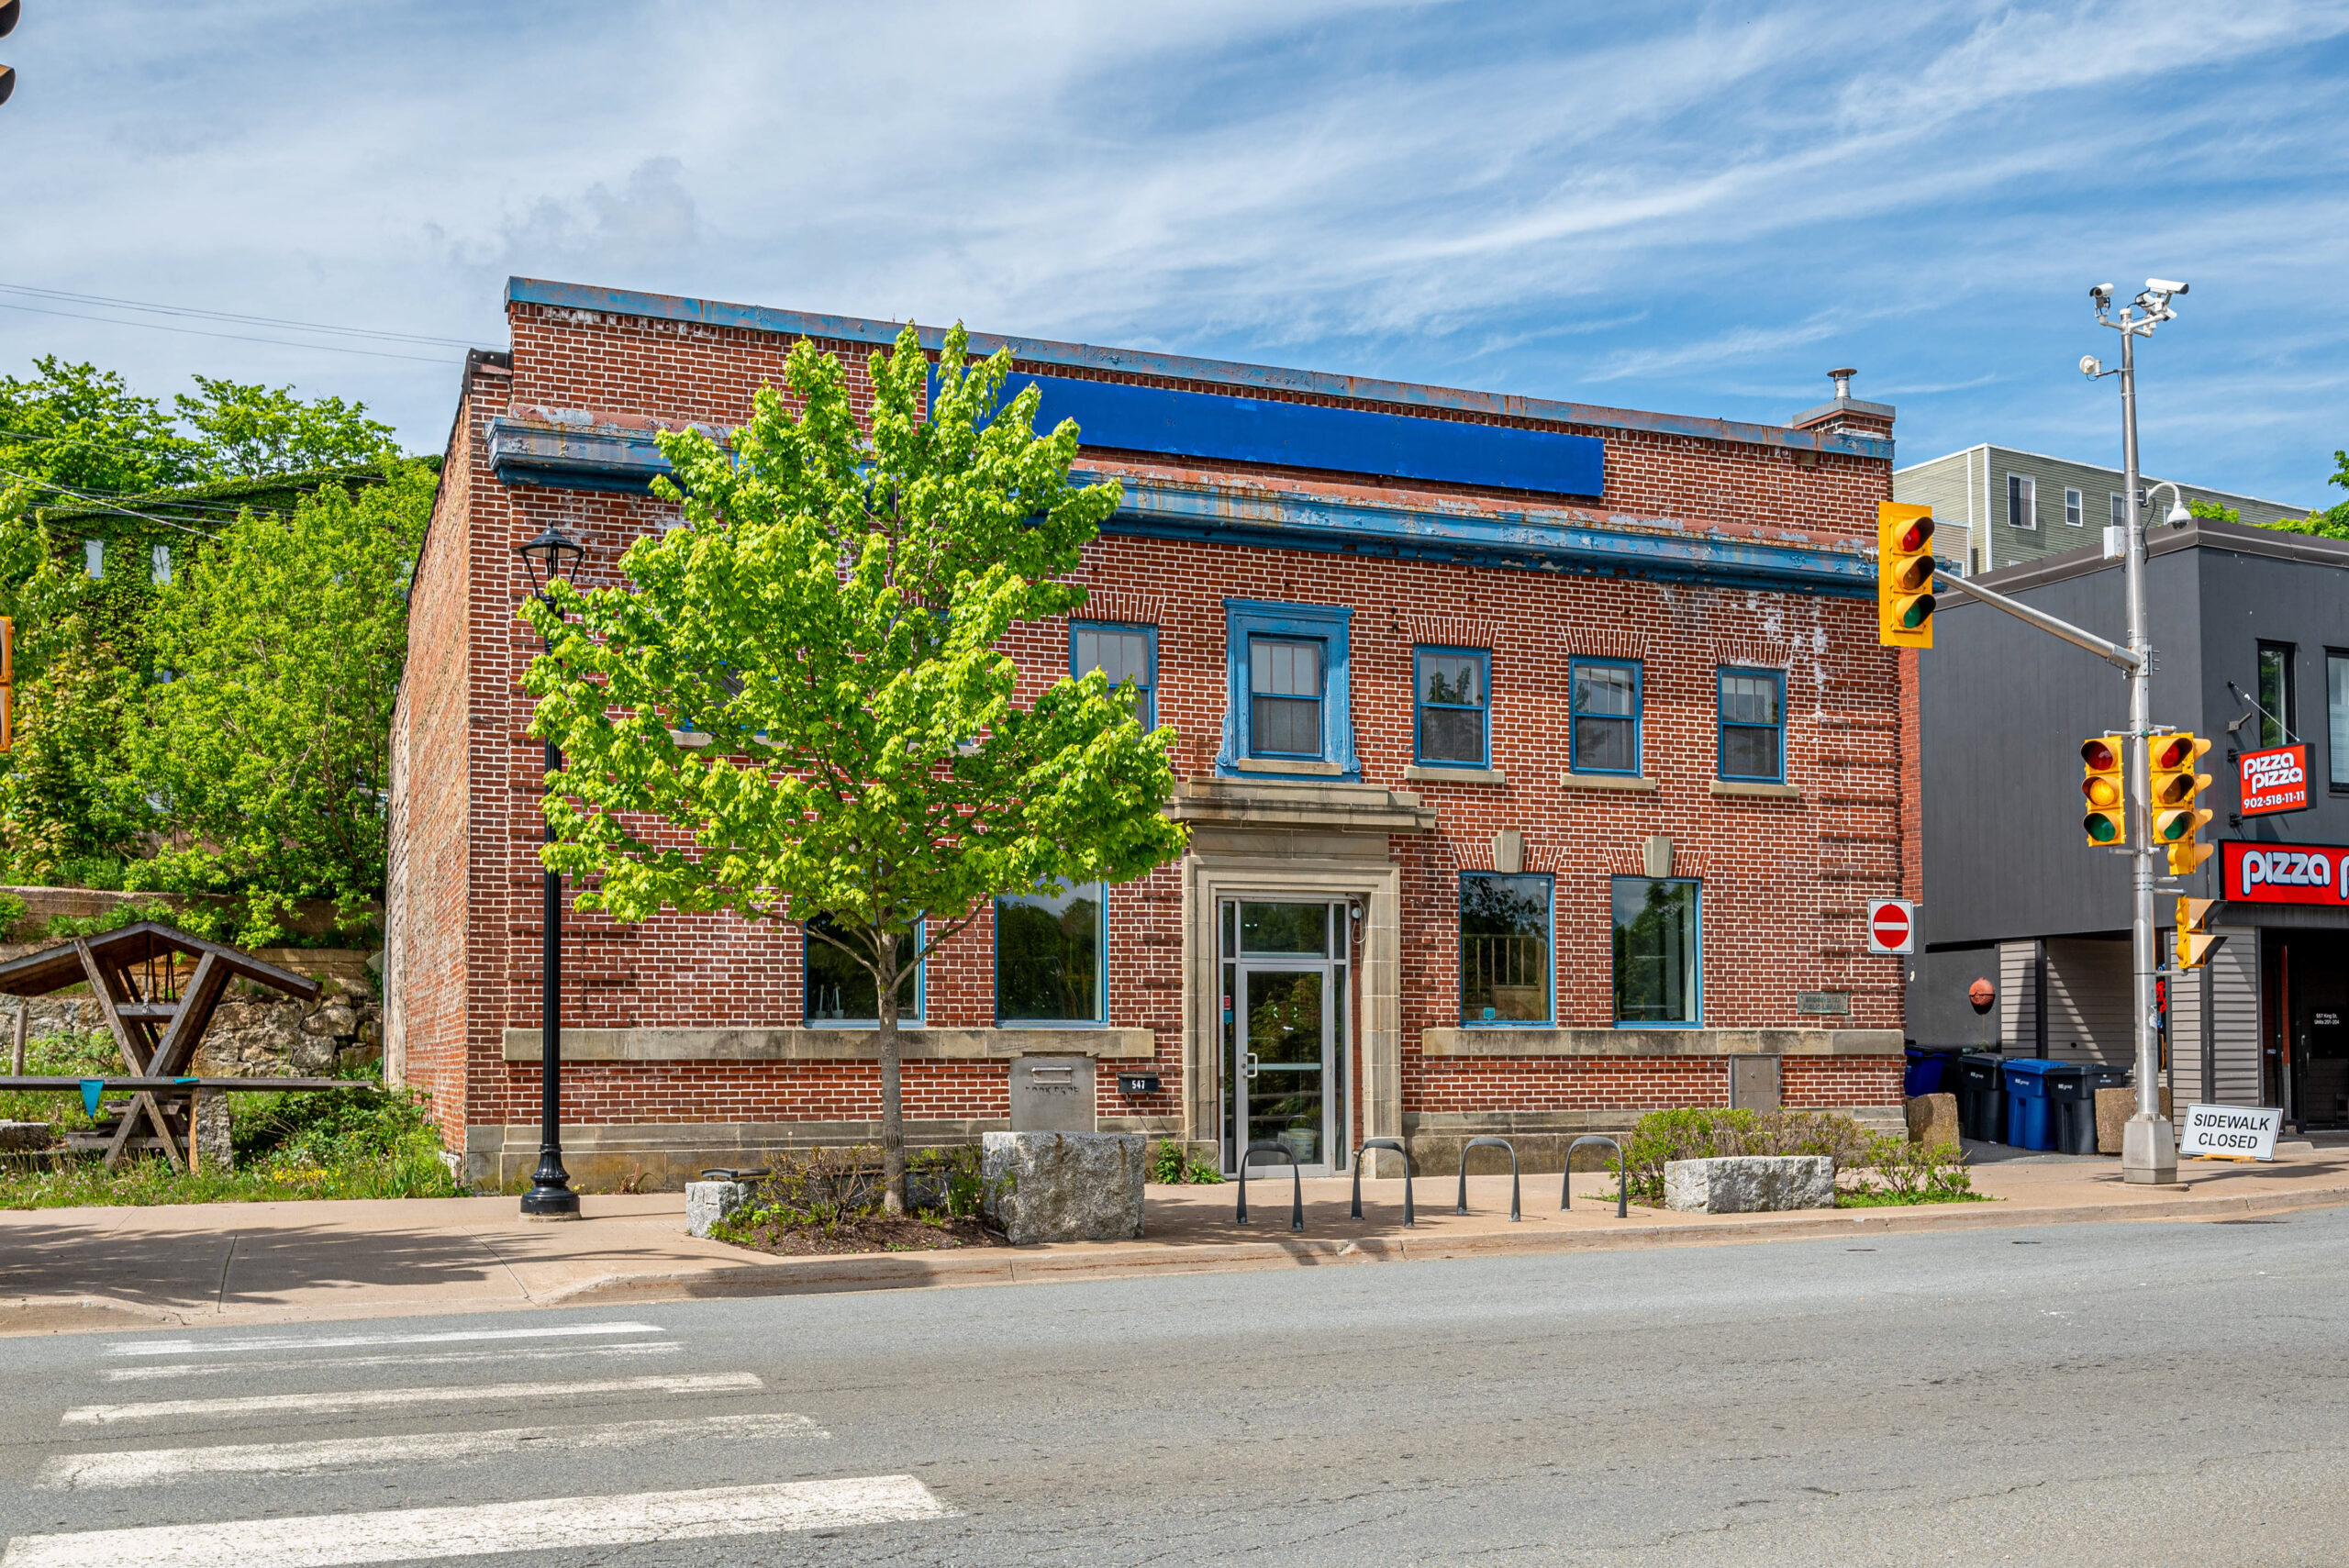 547 King Street - Bridgewater Commercial Building For Sale